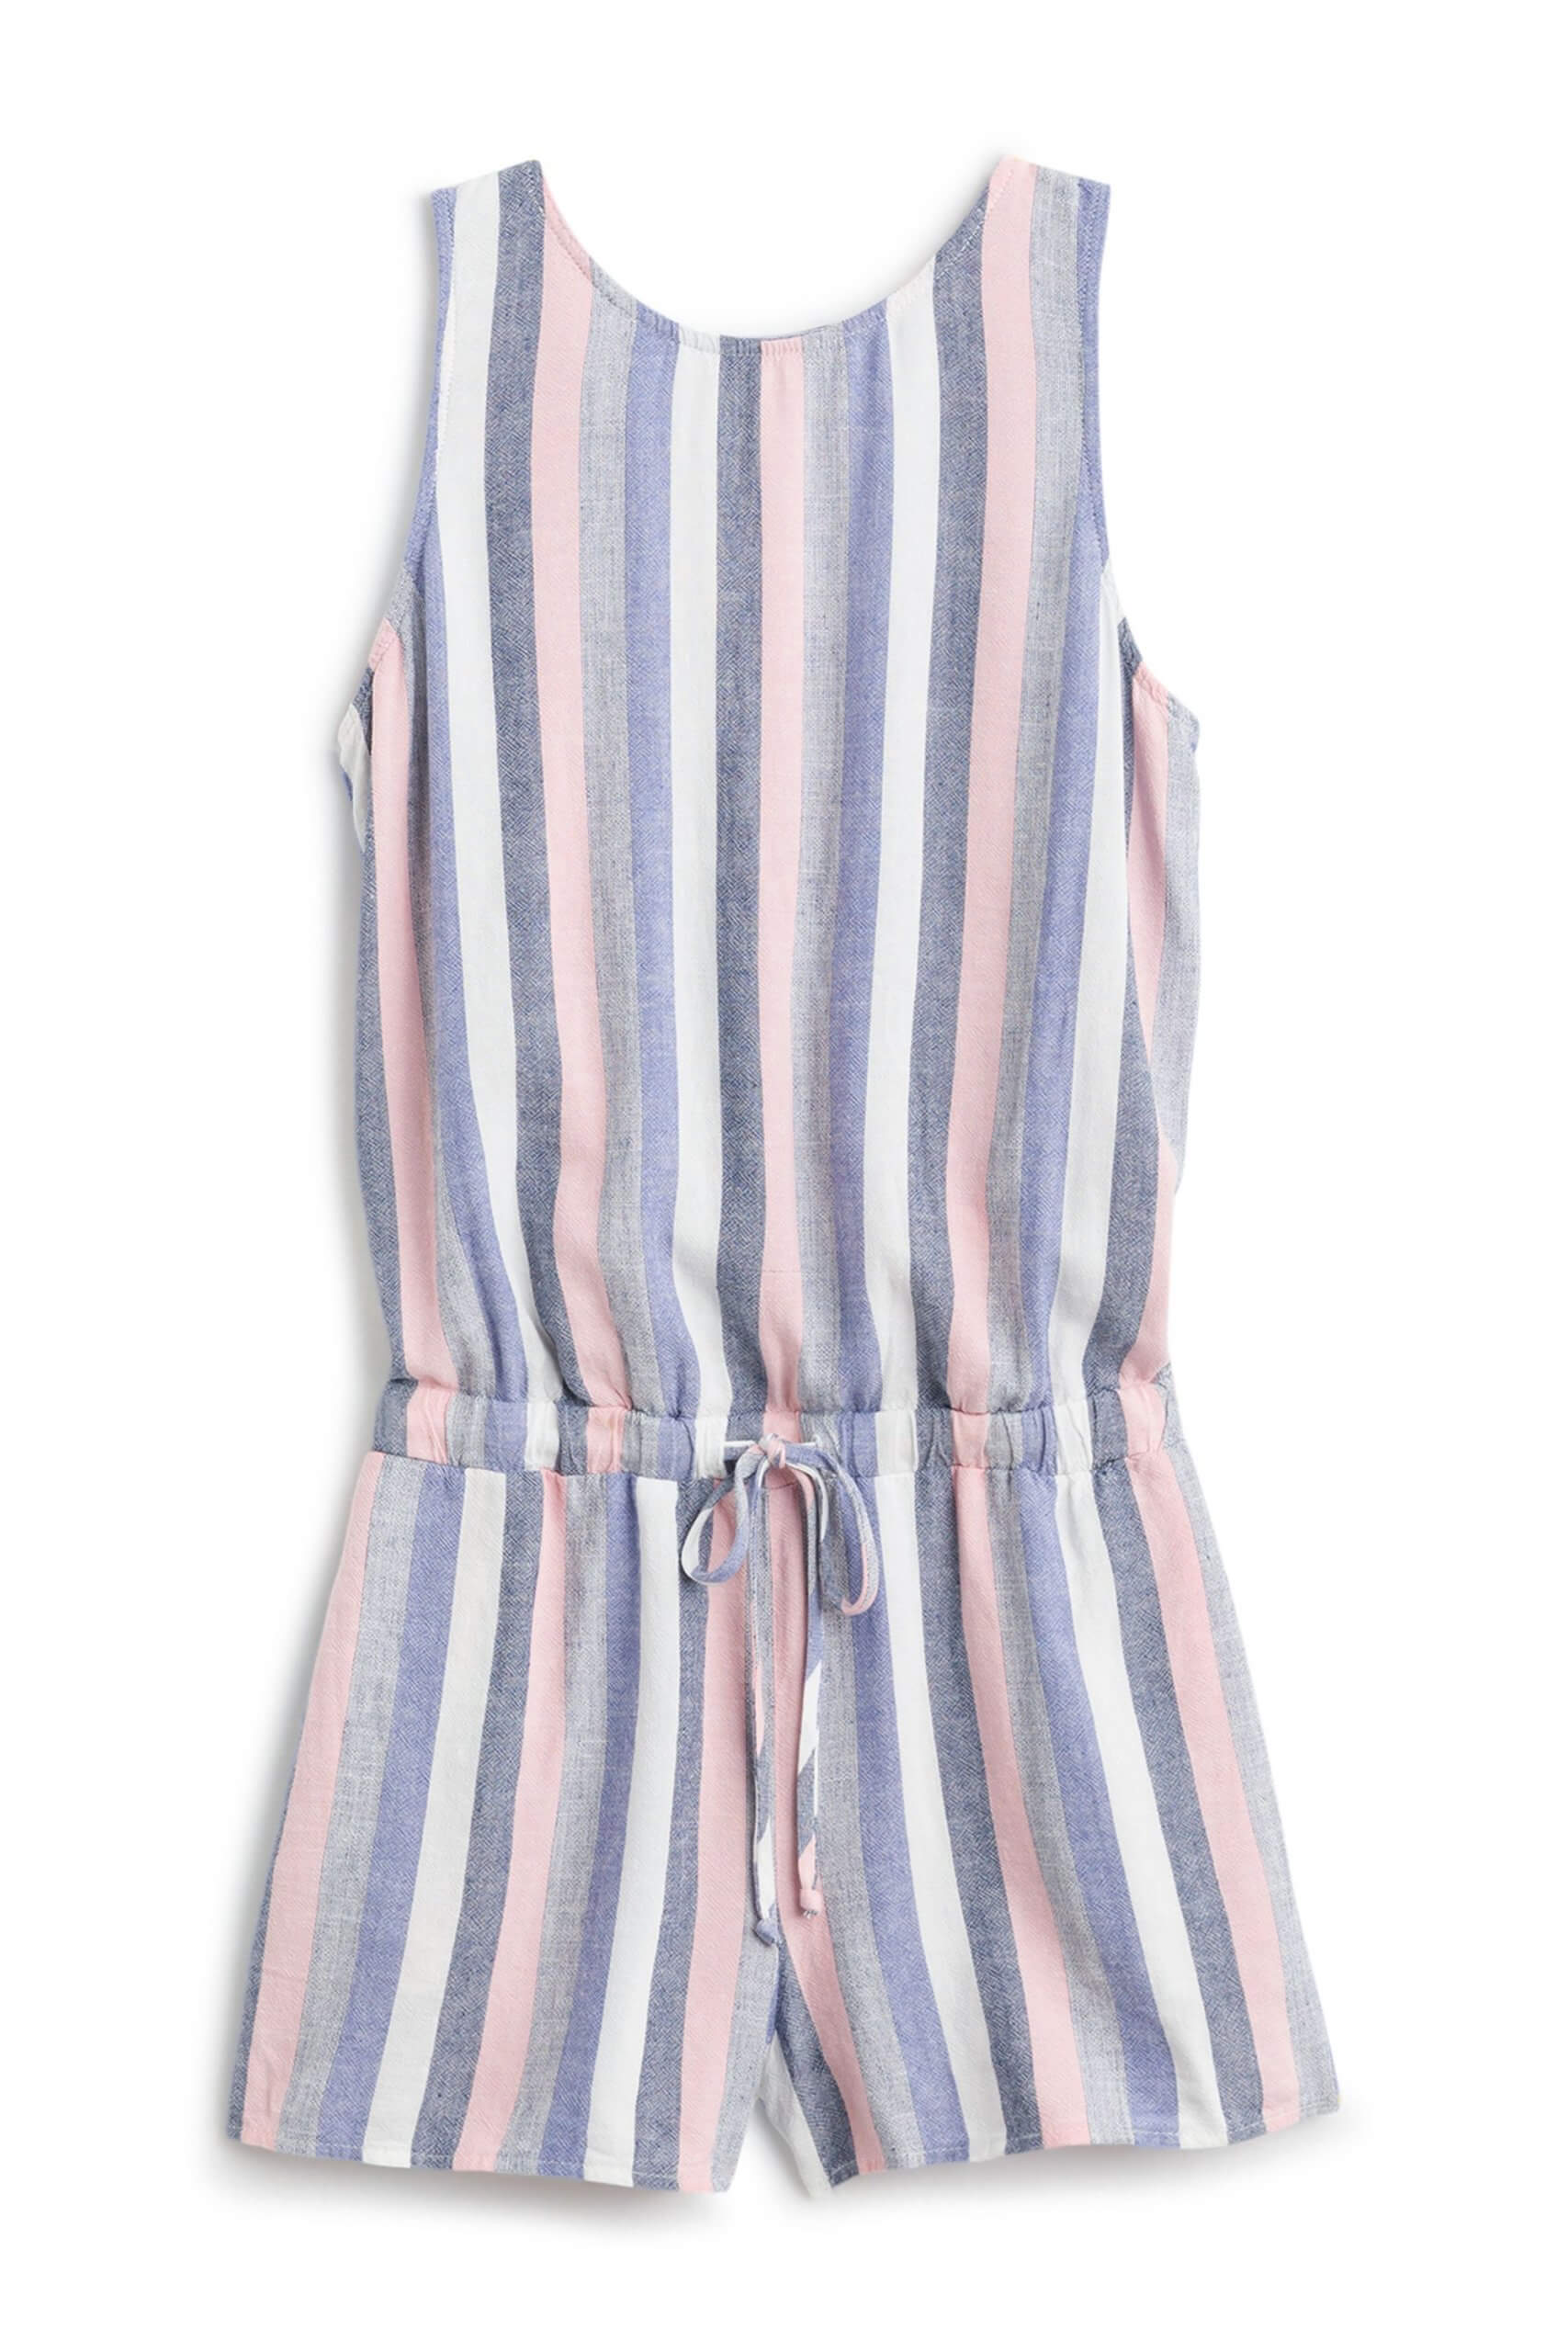 Stitch Fix Women’s pink, blue and white striped romper with a drawstring waist.